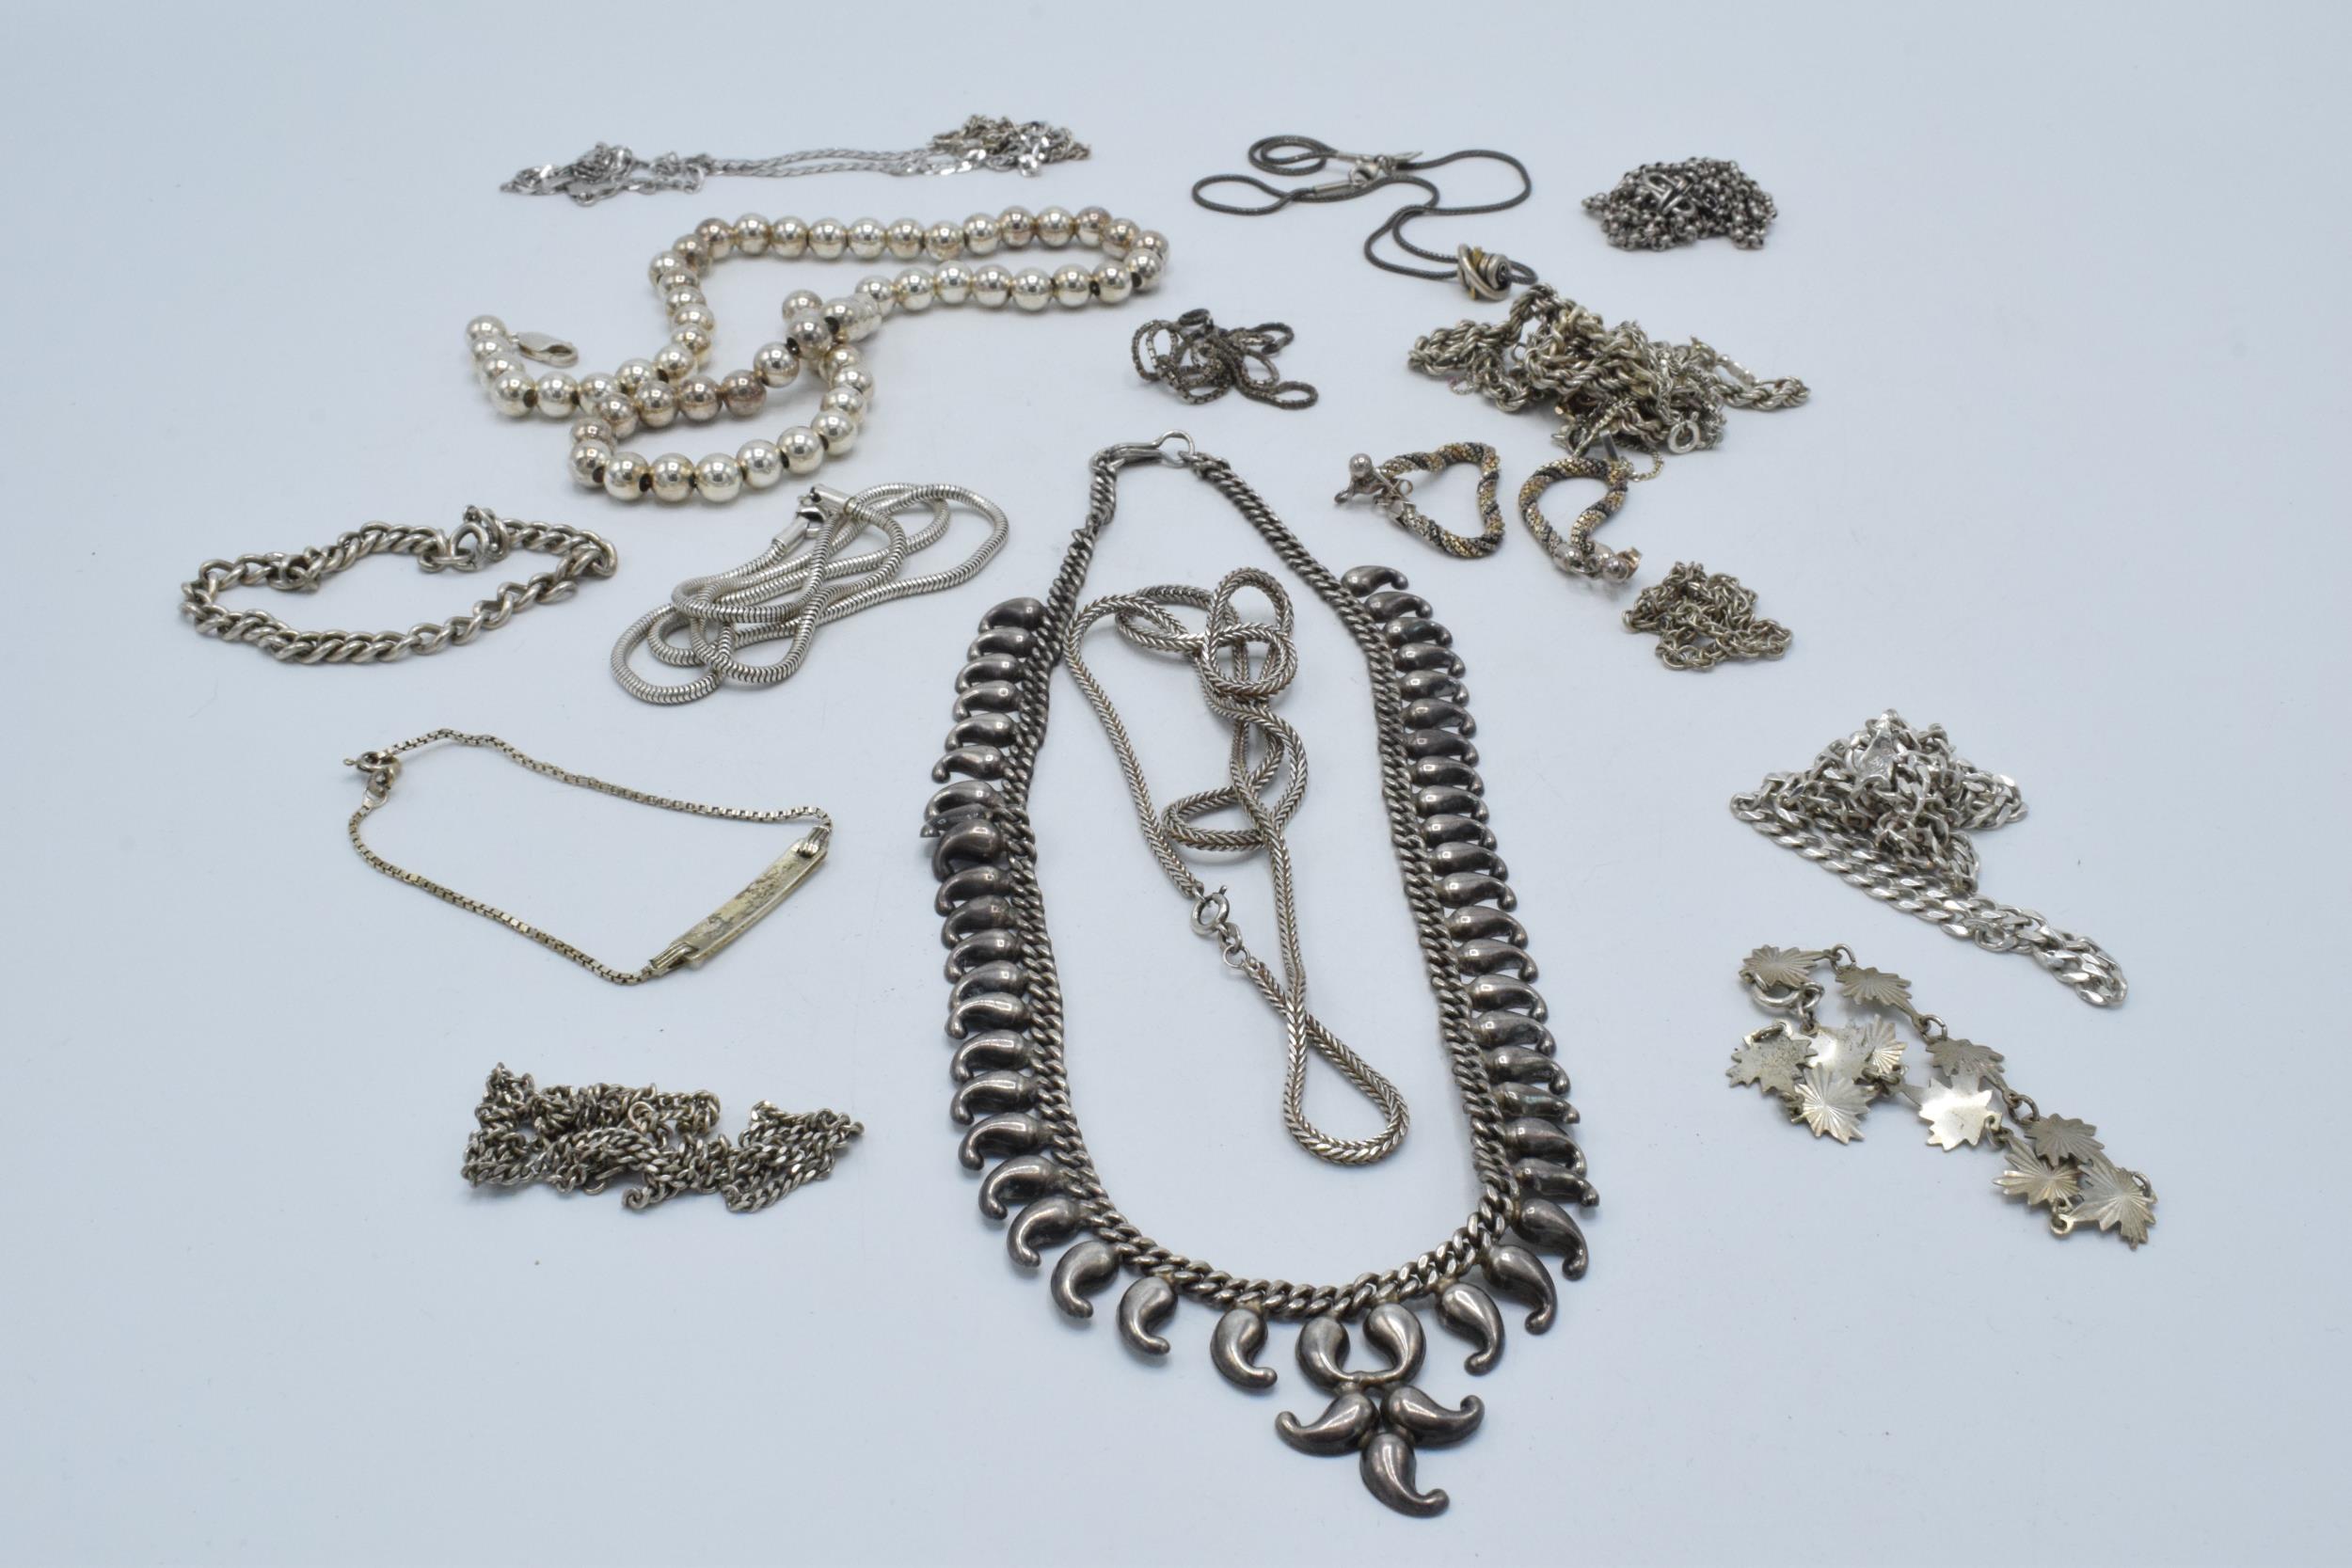 A collection of silver chains and necklaces of varying lengths and styles, 190.8 grams. - Image 2 of 6